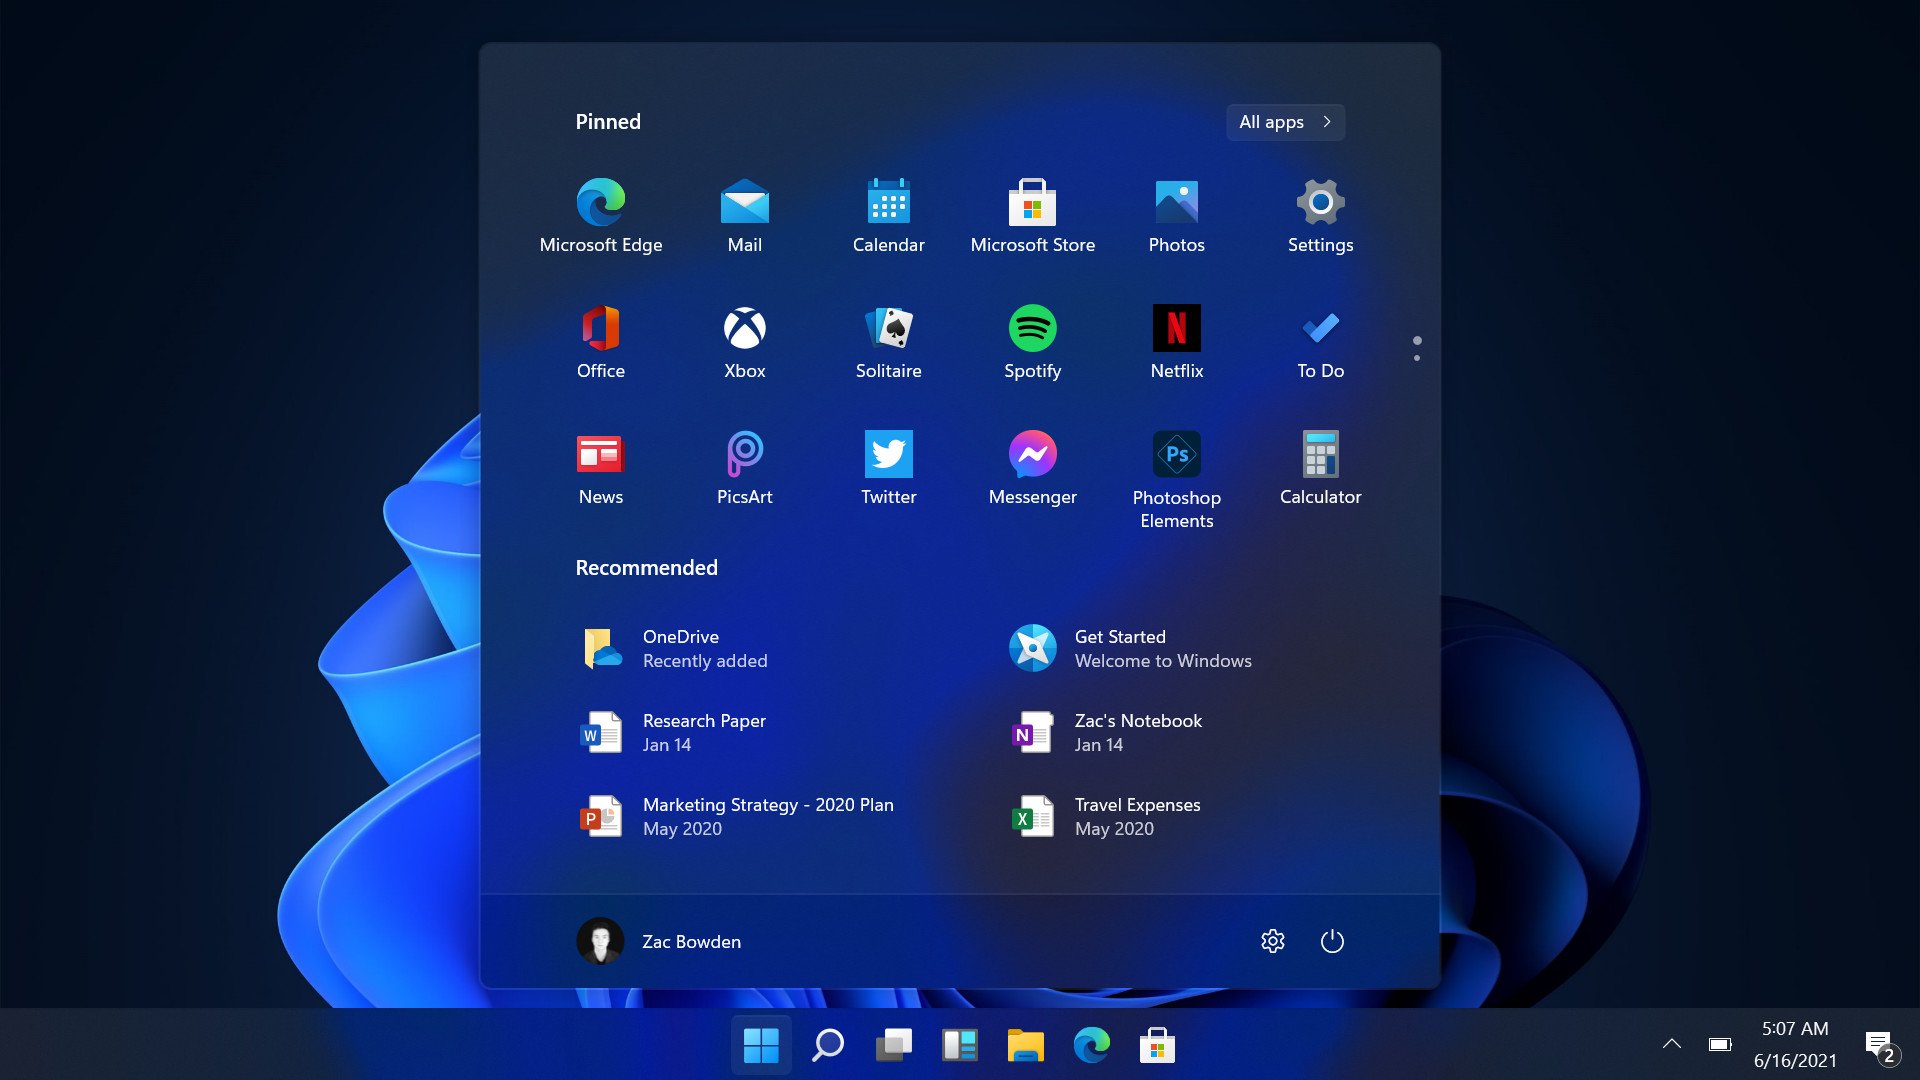 An internal build of Windows 11 has just leaked, and we've had a chance to go hands-on with the new Start menu and Taskbar interfaces that headline so